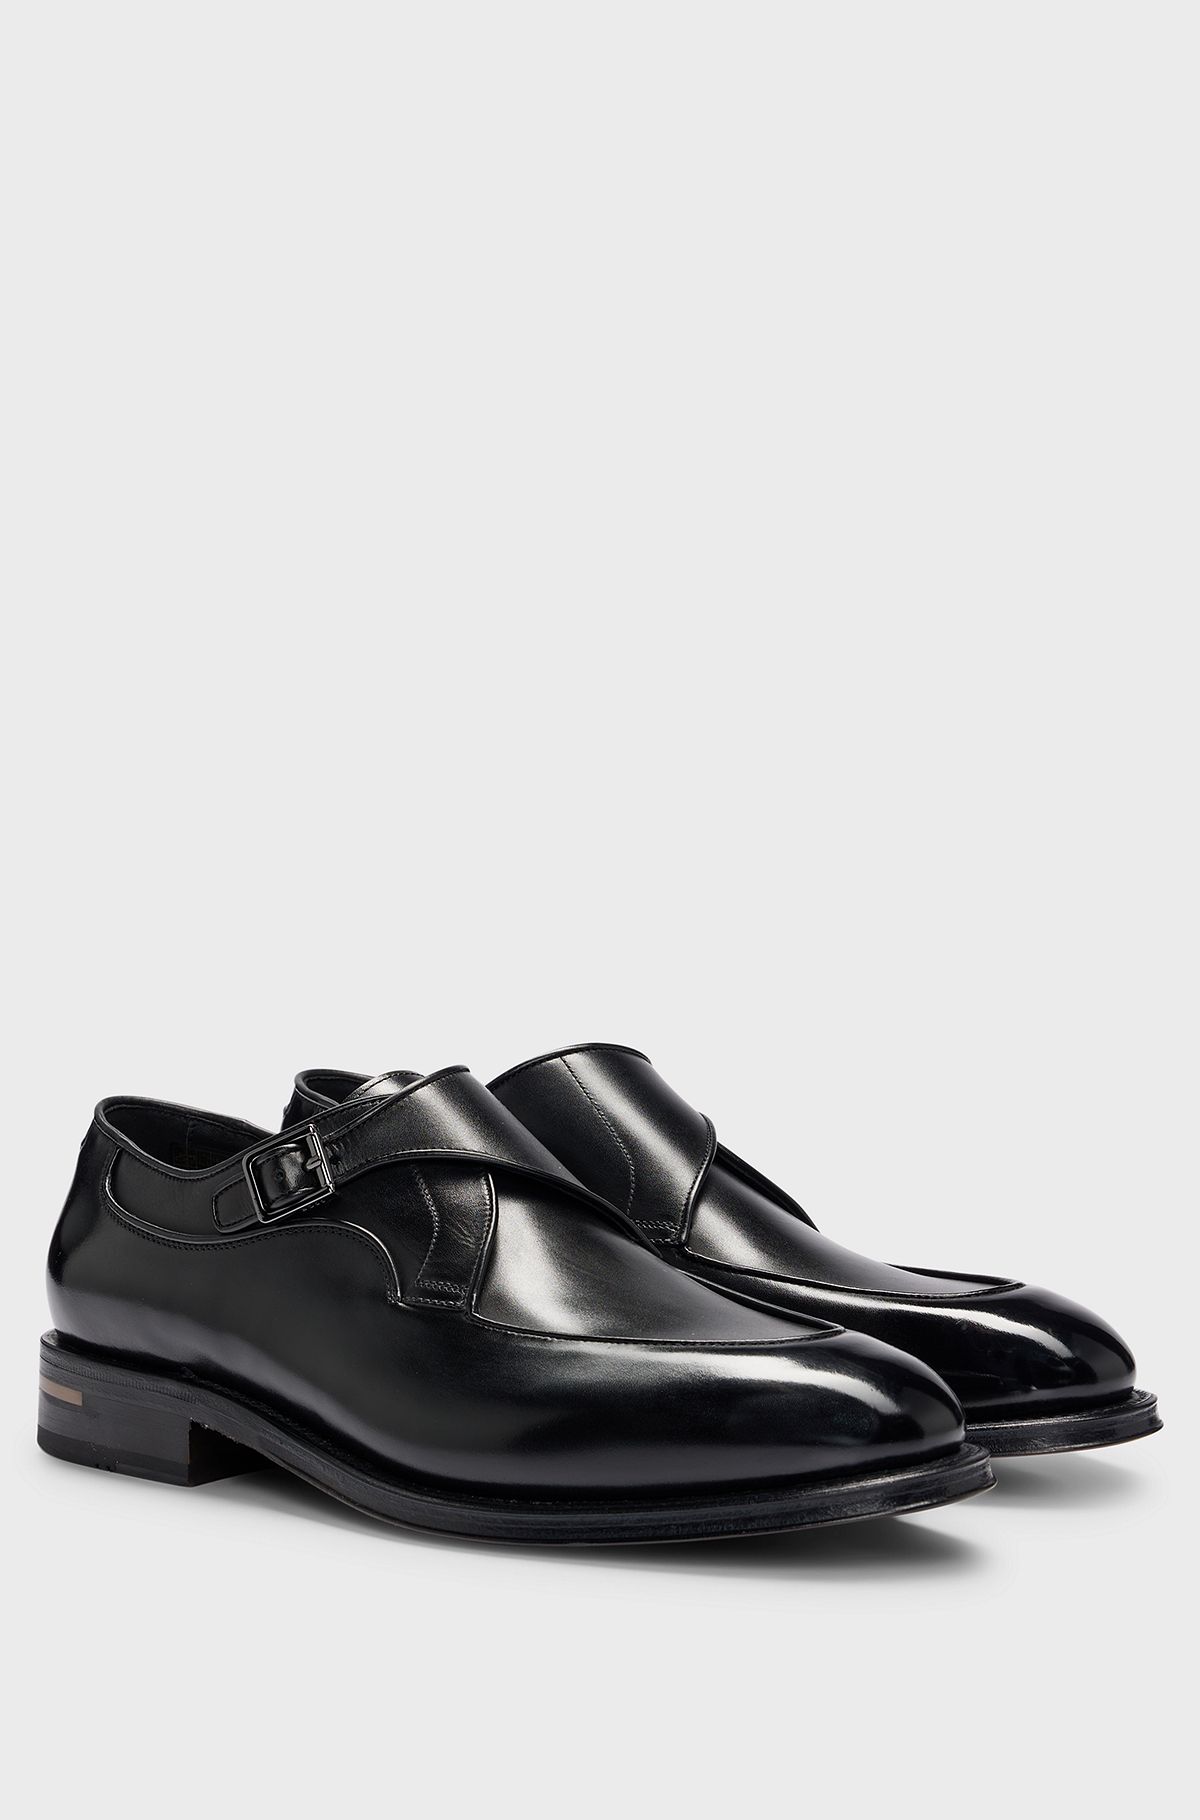 Single-monk shoes in burnished leather, Black